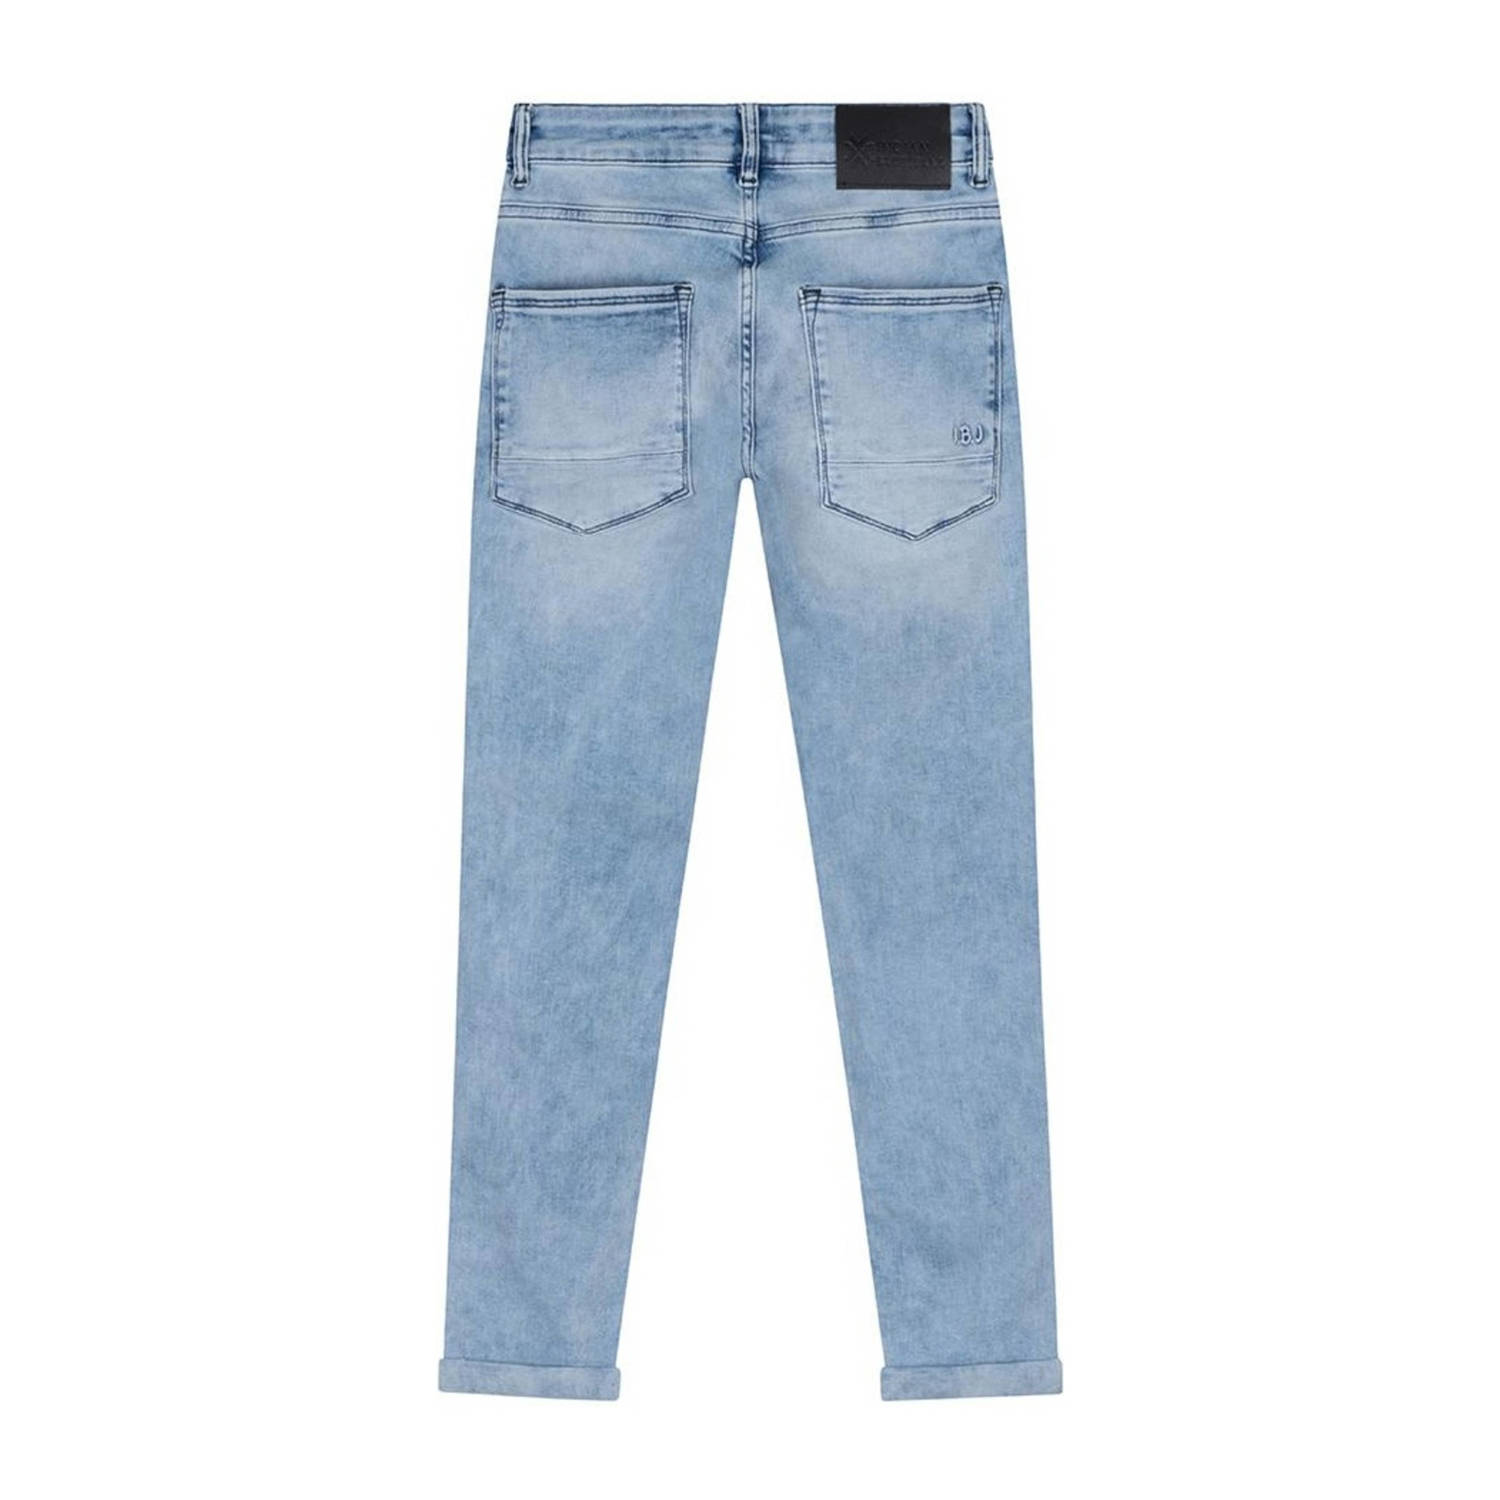 Indian Blue Jeans straight fit jeans used light denim